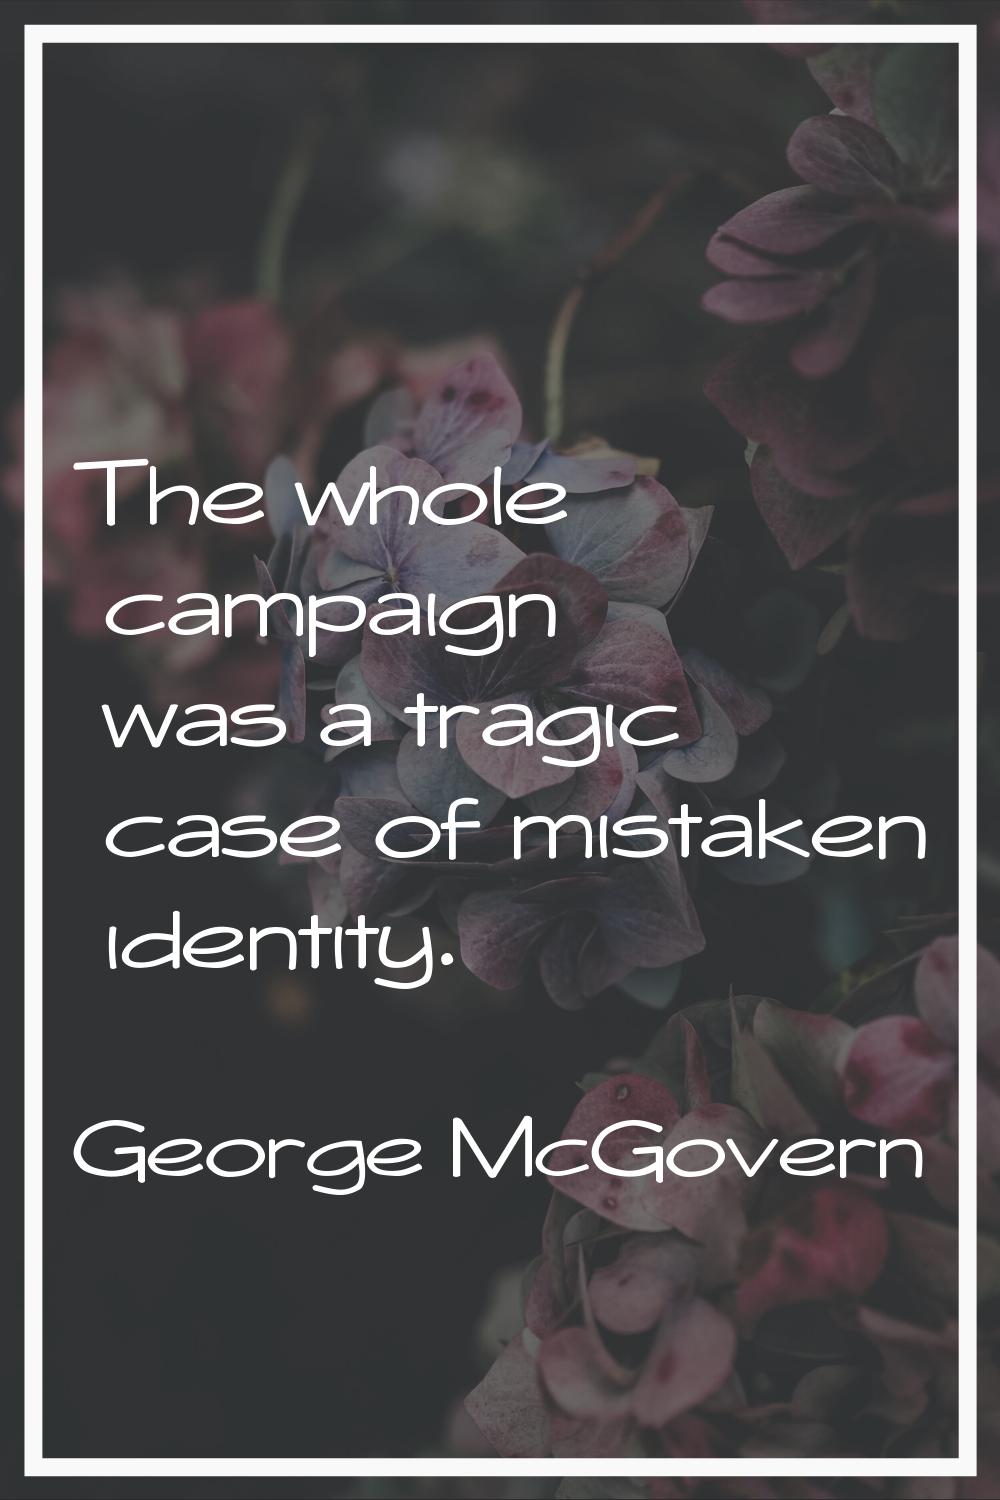 The whole campaign was a tragic case of mistaken identity.